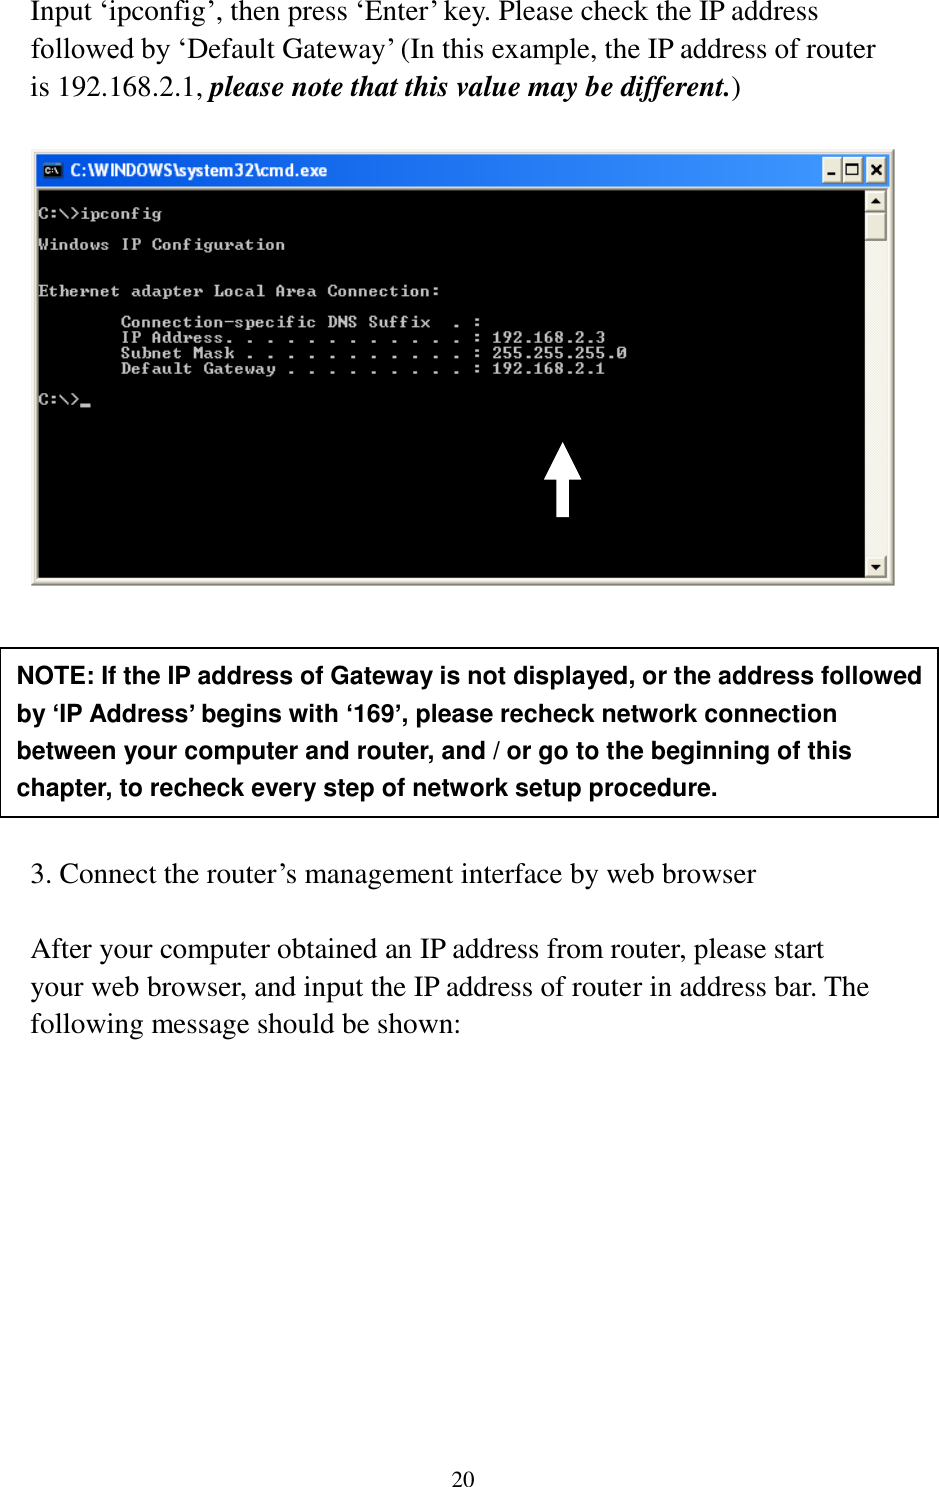 20 Input „ipconfig‟, then press „Enter‟ key. Please check the IP address followed by „Default Gateway‟ (In this example, the IP address of router is 192.168.2.1, please note that this value may be different.)         3. Connect the router‟s management interface by web browser  After your computer obtained an IP address from router, please start your web browser, and input the IP address of router in address bar. The following message should be shown: NOTE: If the IP address of Gateway is not displayed, or the address followed by ‘IP Address’ begins with ‘169’, please recheck network connection between your computer and router, and / or go to the beginning of this chapter, to recheck every step of network setup procedure. 